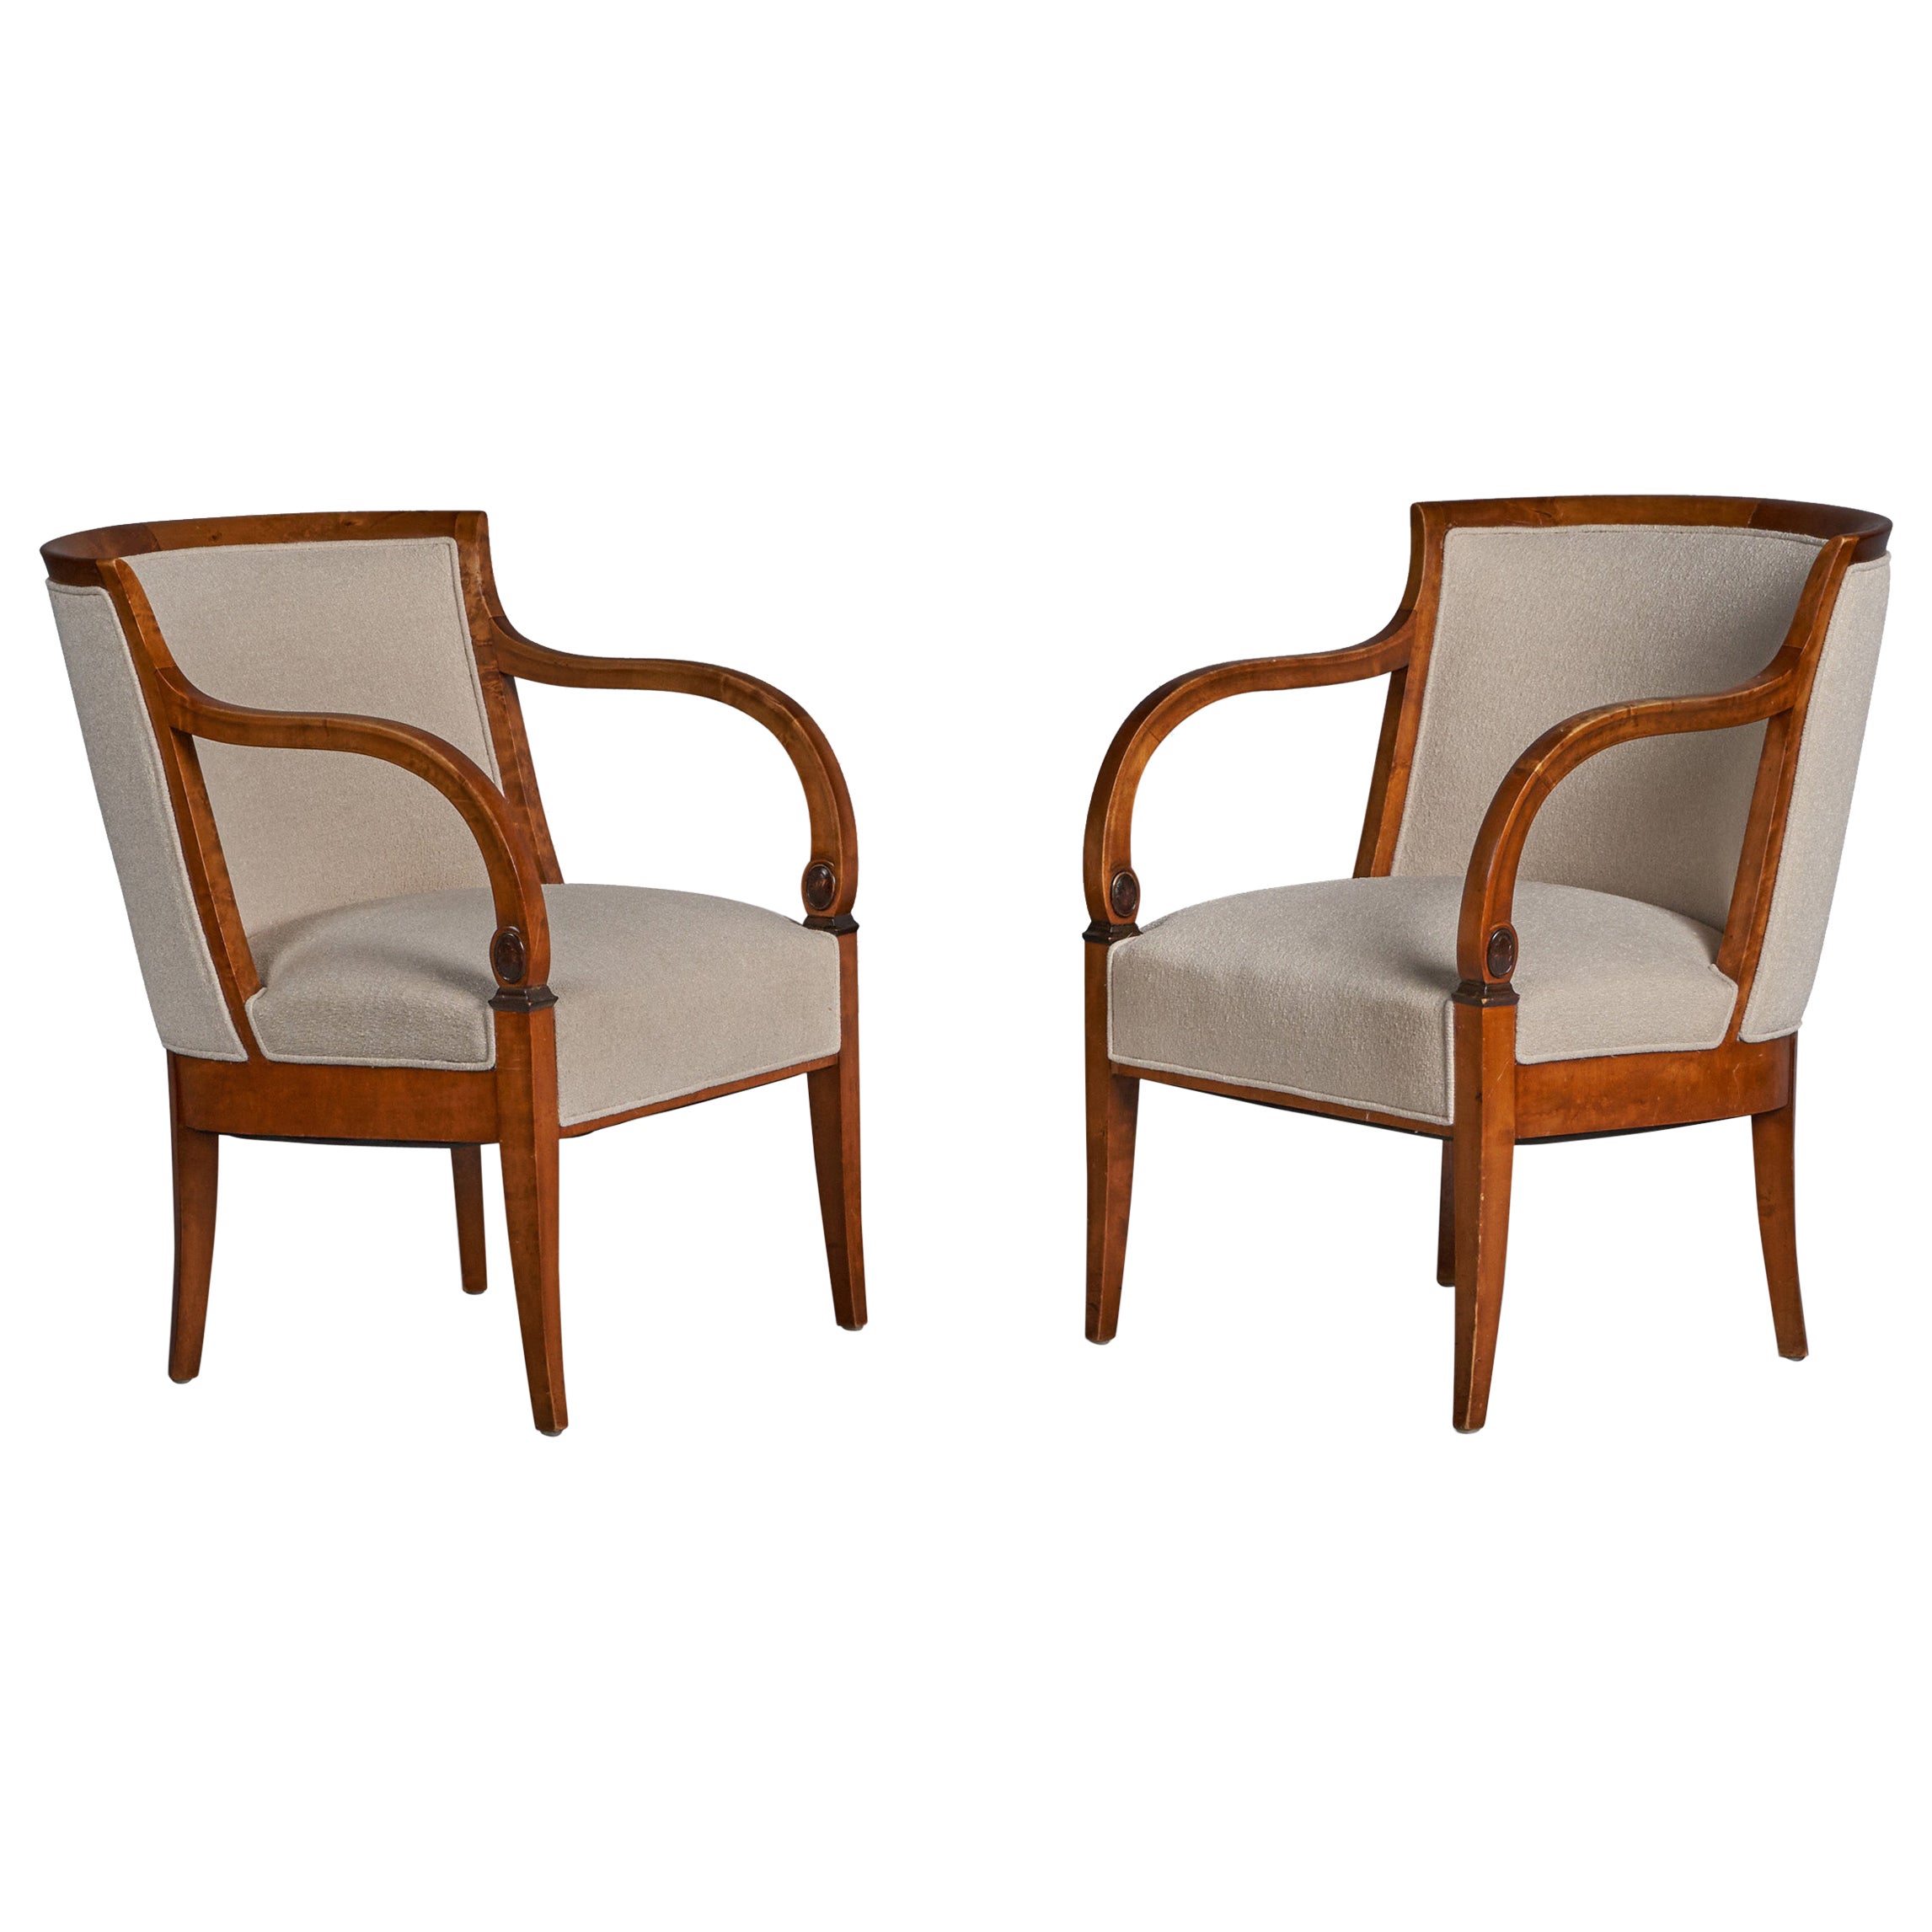 Swedish Designer, Lounge Chairs, Birch, Fabric, Sweden, 1920s For Sale